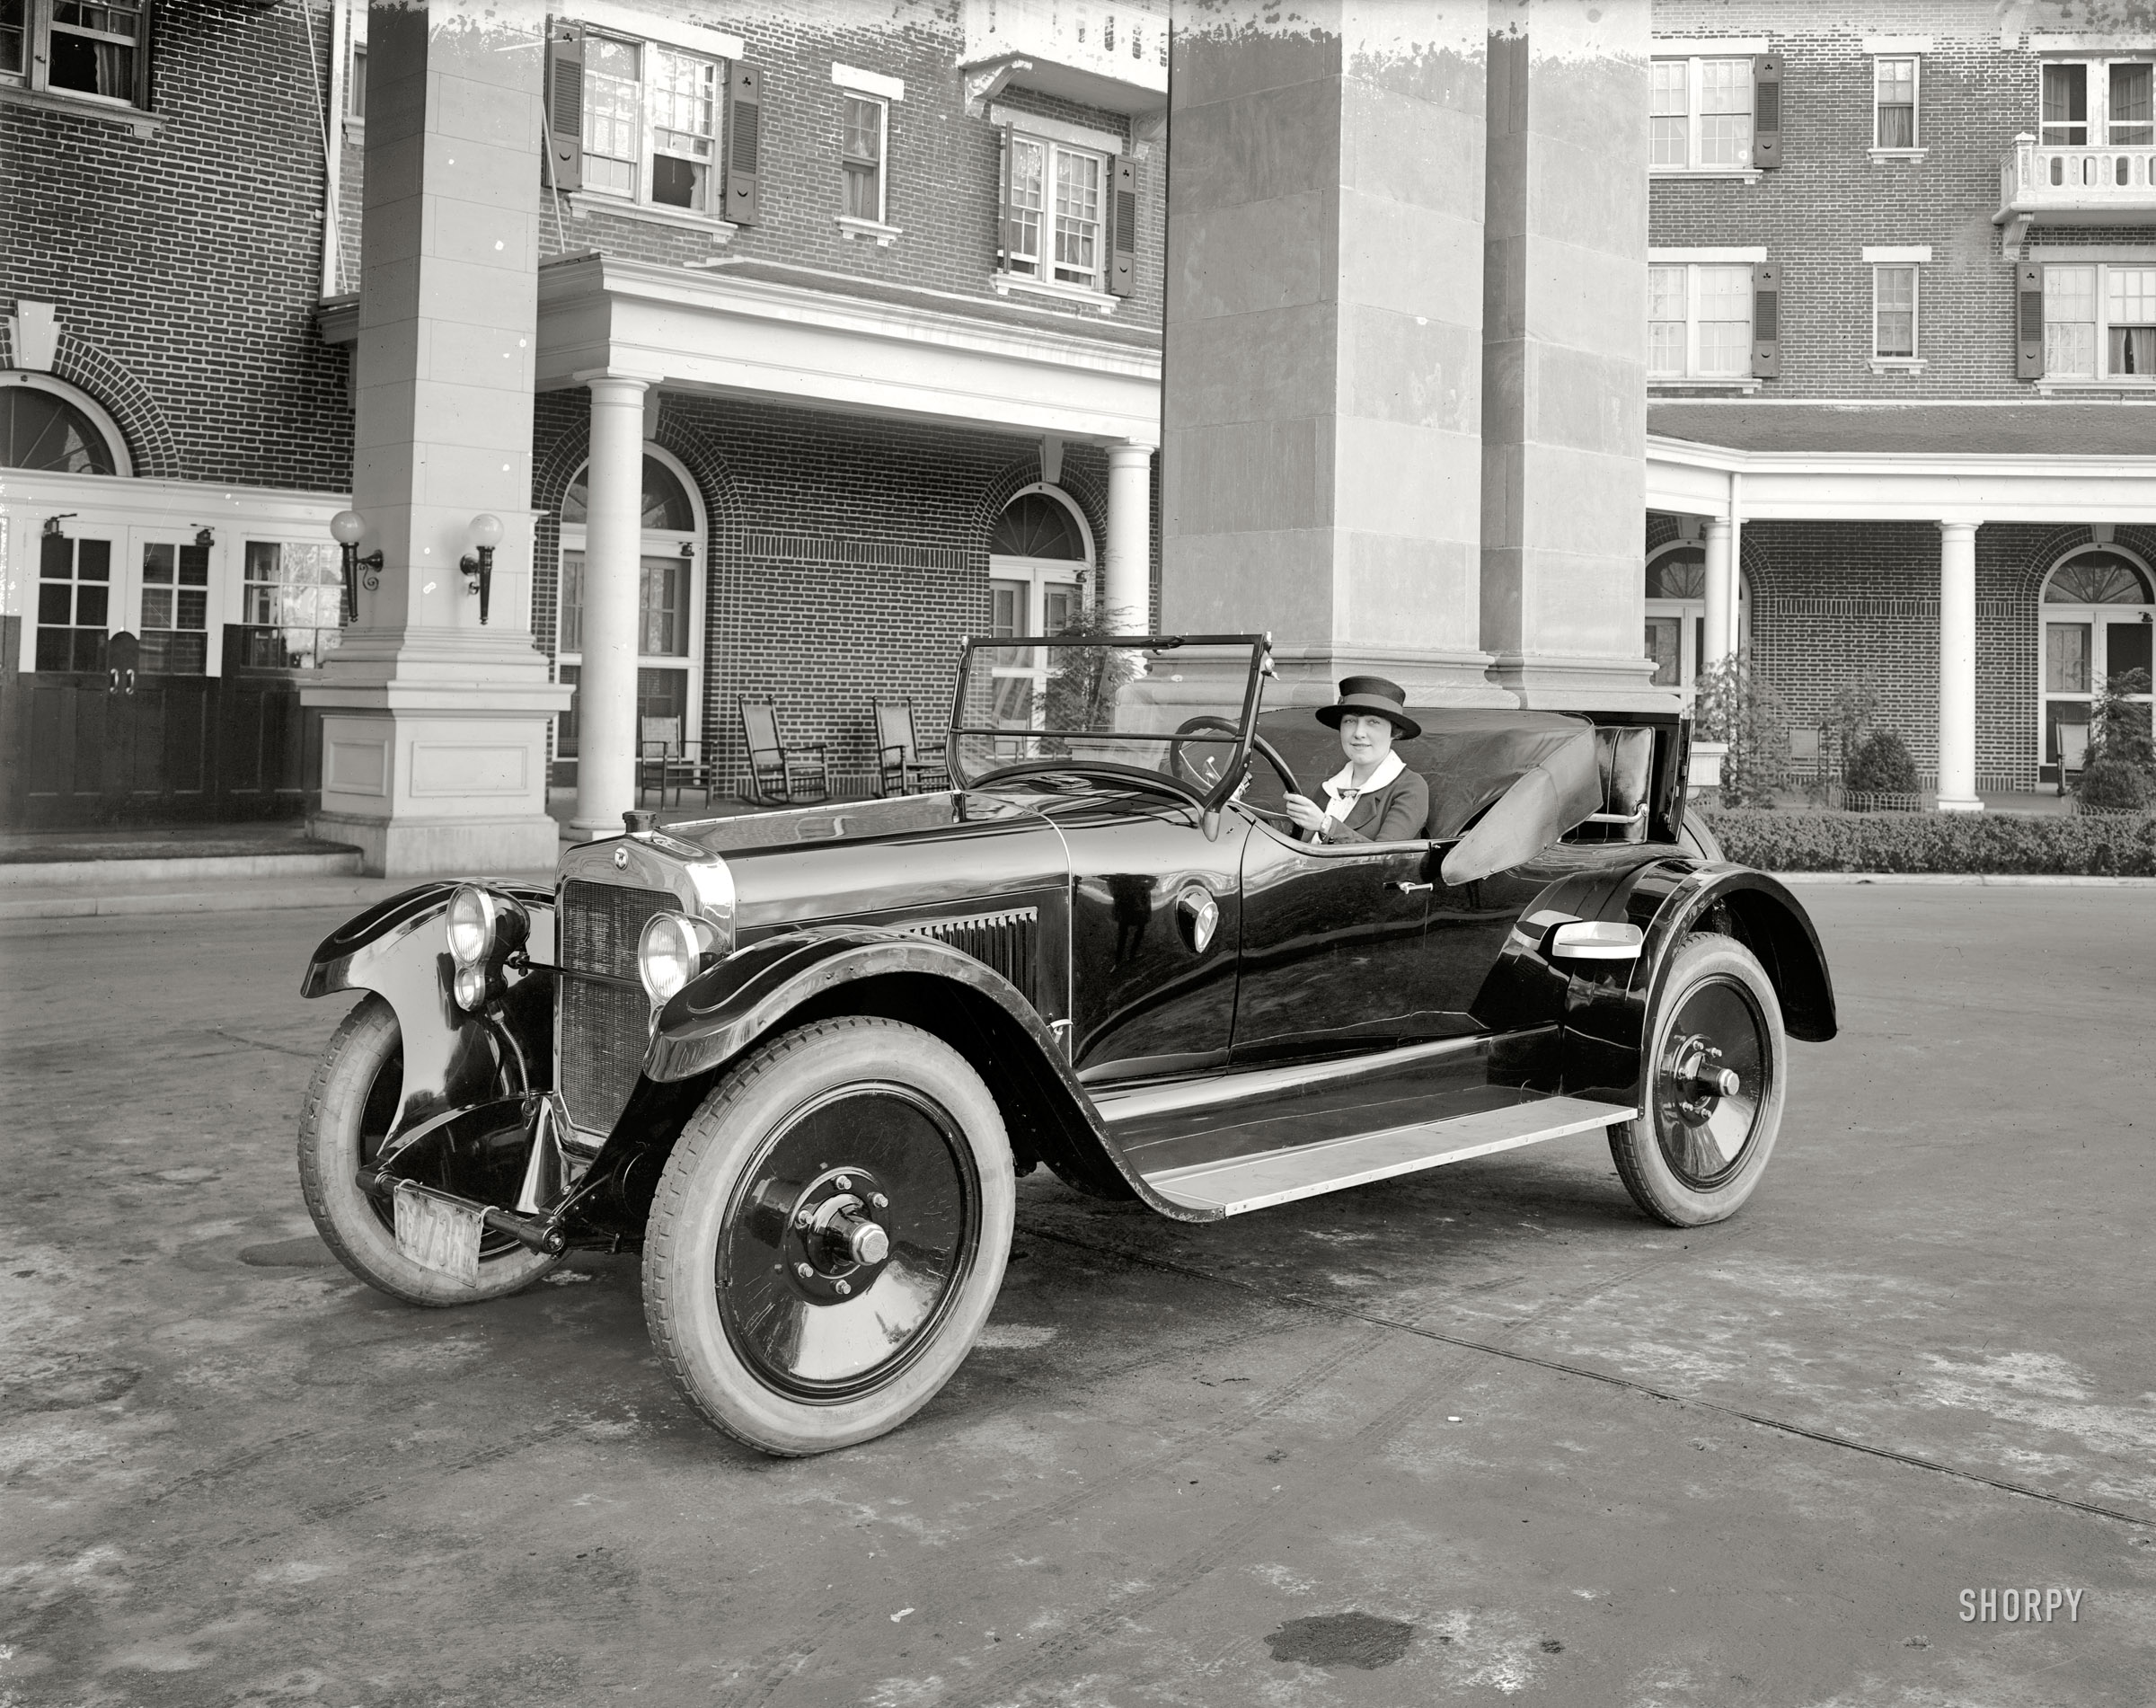 Washington, D.C., 1921. "Mrs. Phil Riley in St. Claire car." (See the comments for more about Mrs. R.) National Photo Company glass negative. View full size.